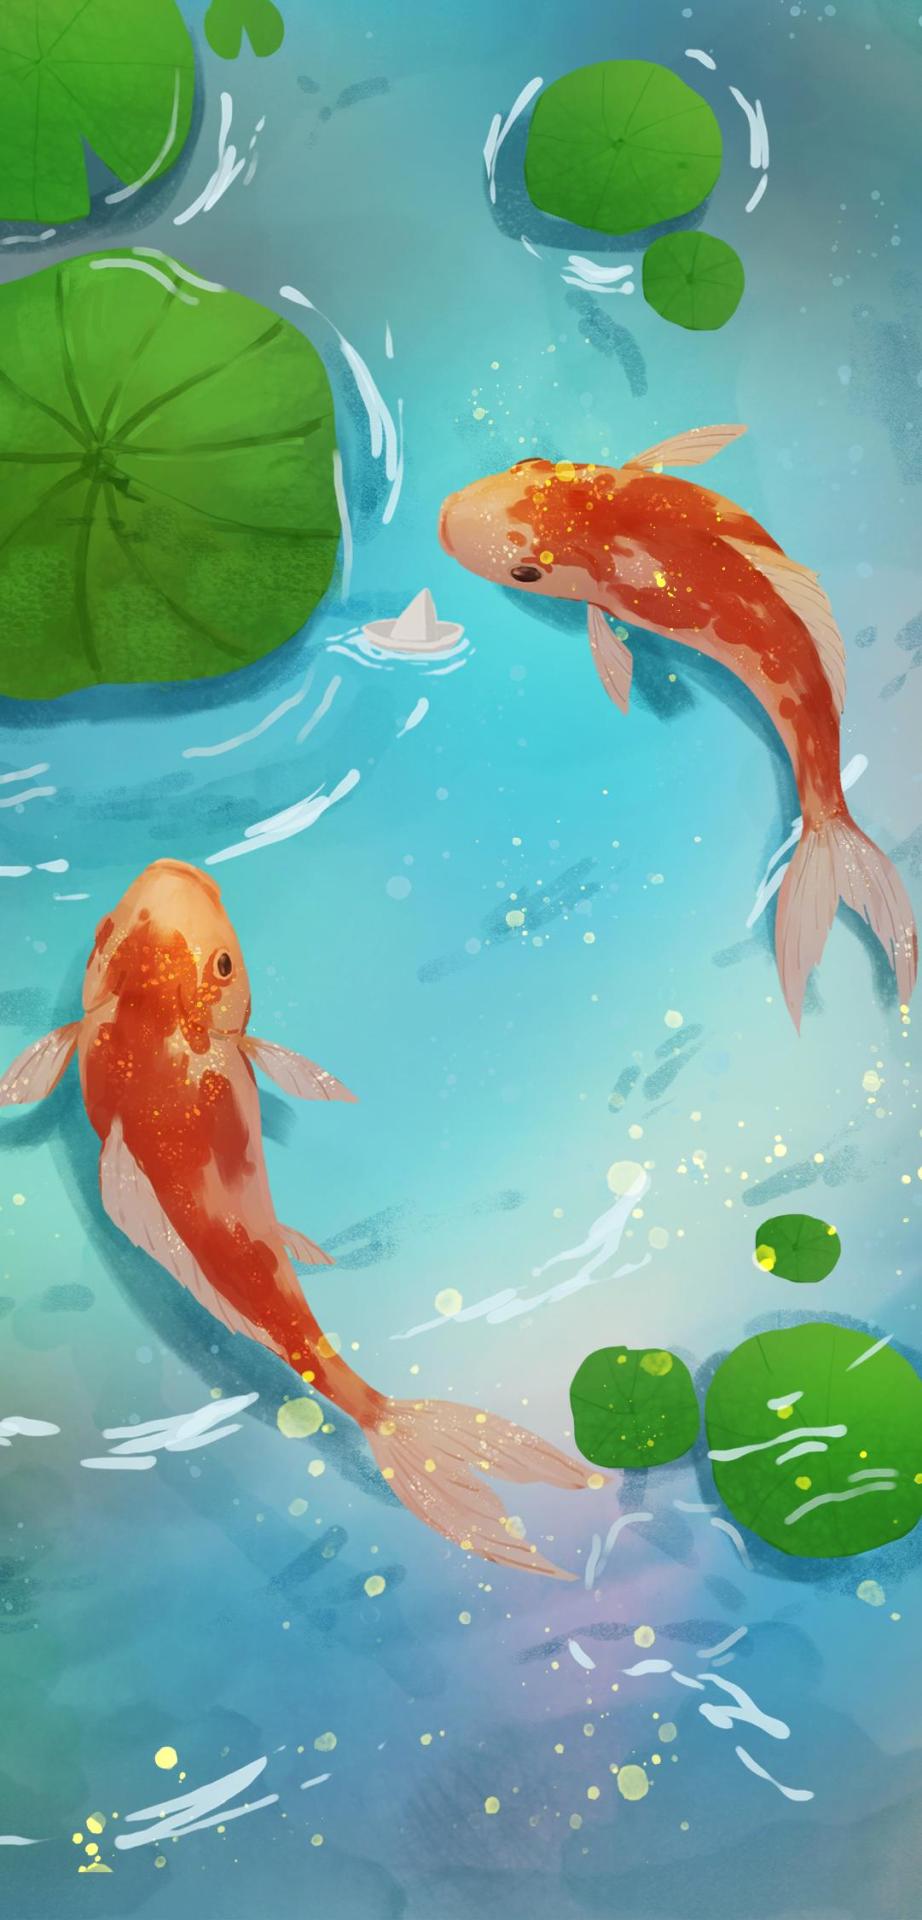 IPhone wallpaper of two koi fish swimming in a pond - Koi fish